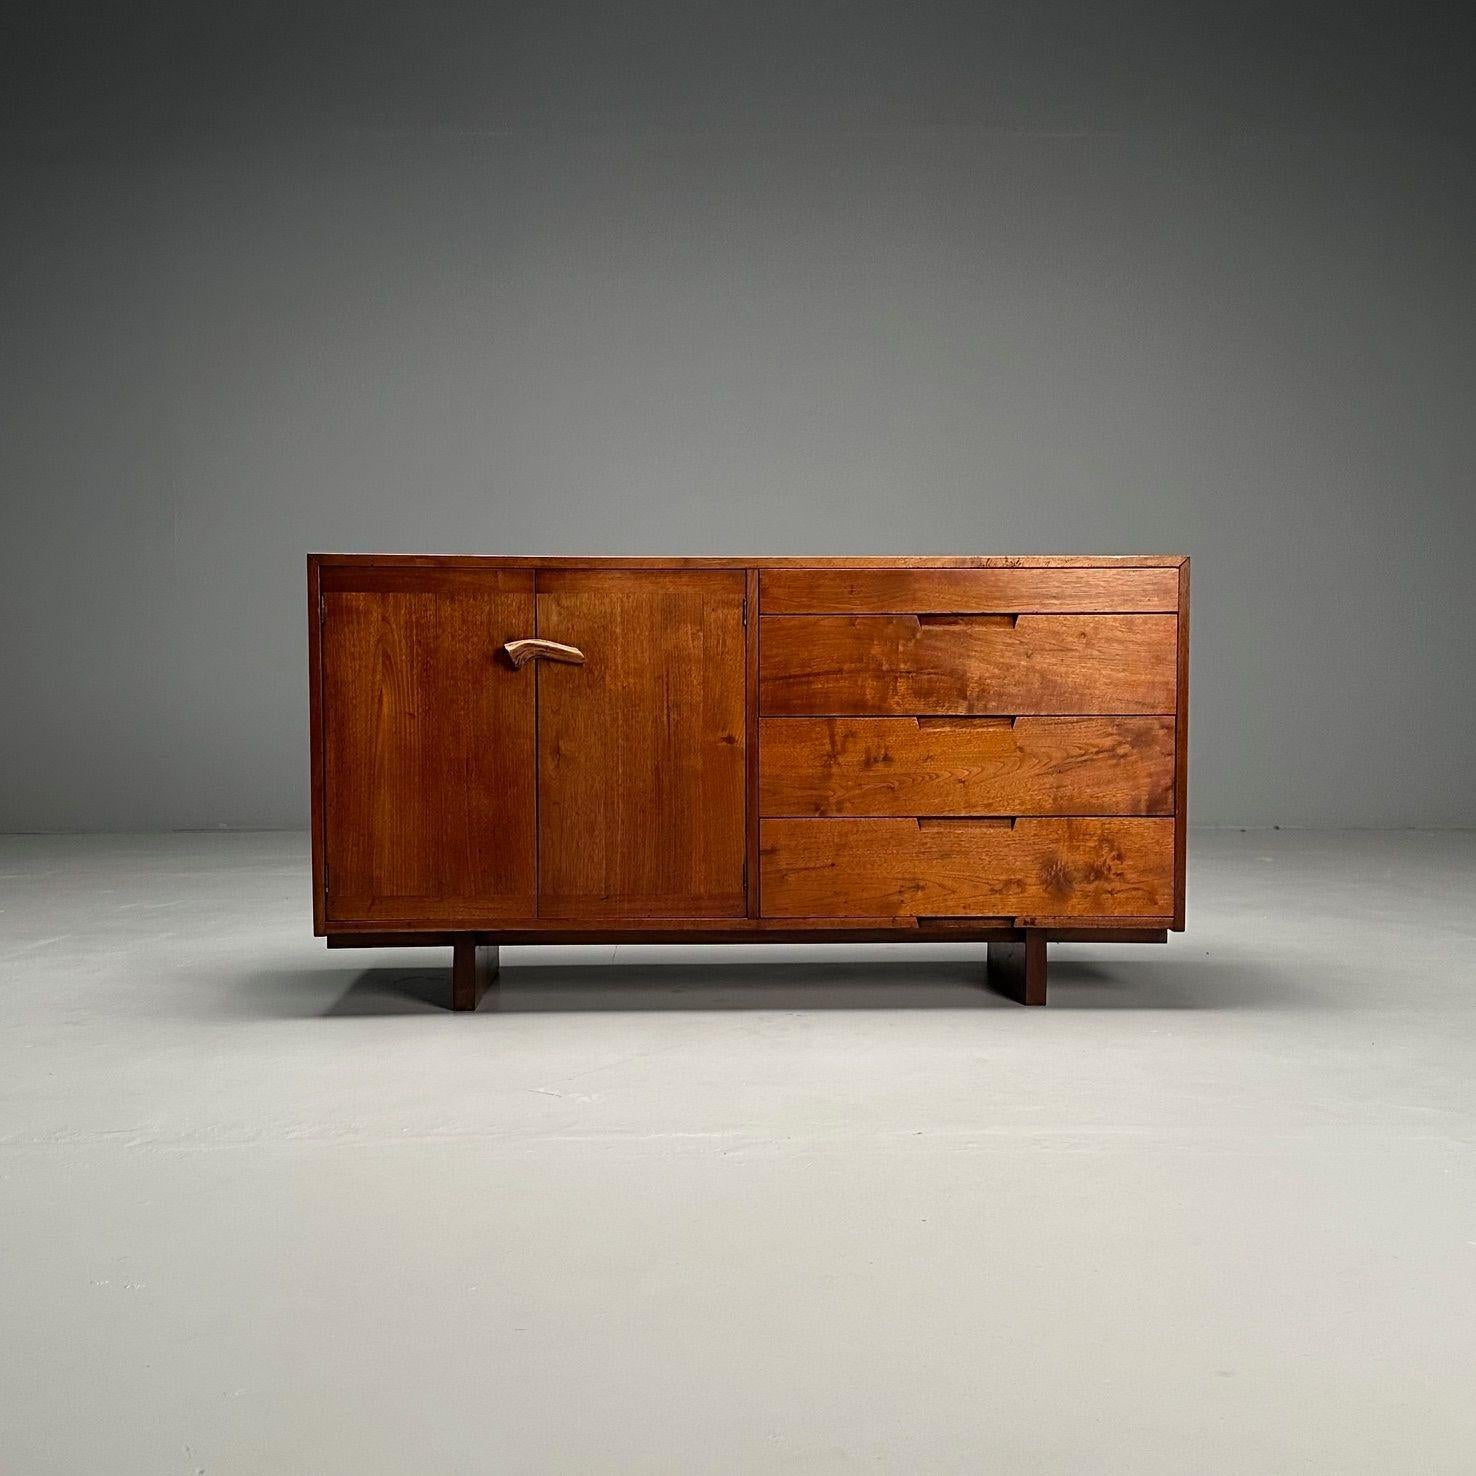 George Nakashima, American Studio, Mid-Century Modern, Rare Cabinet, USA, 1953 In Good Condition For Sale In Stamford, CT